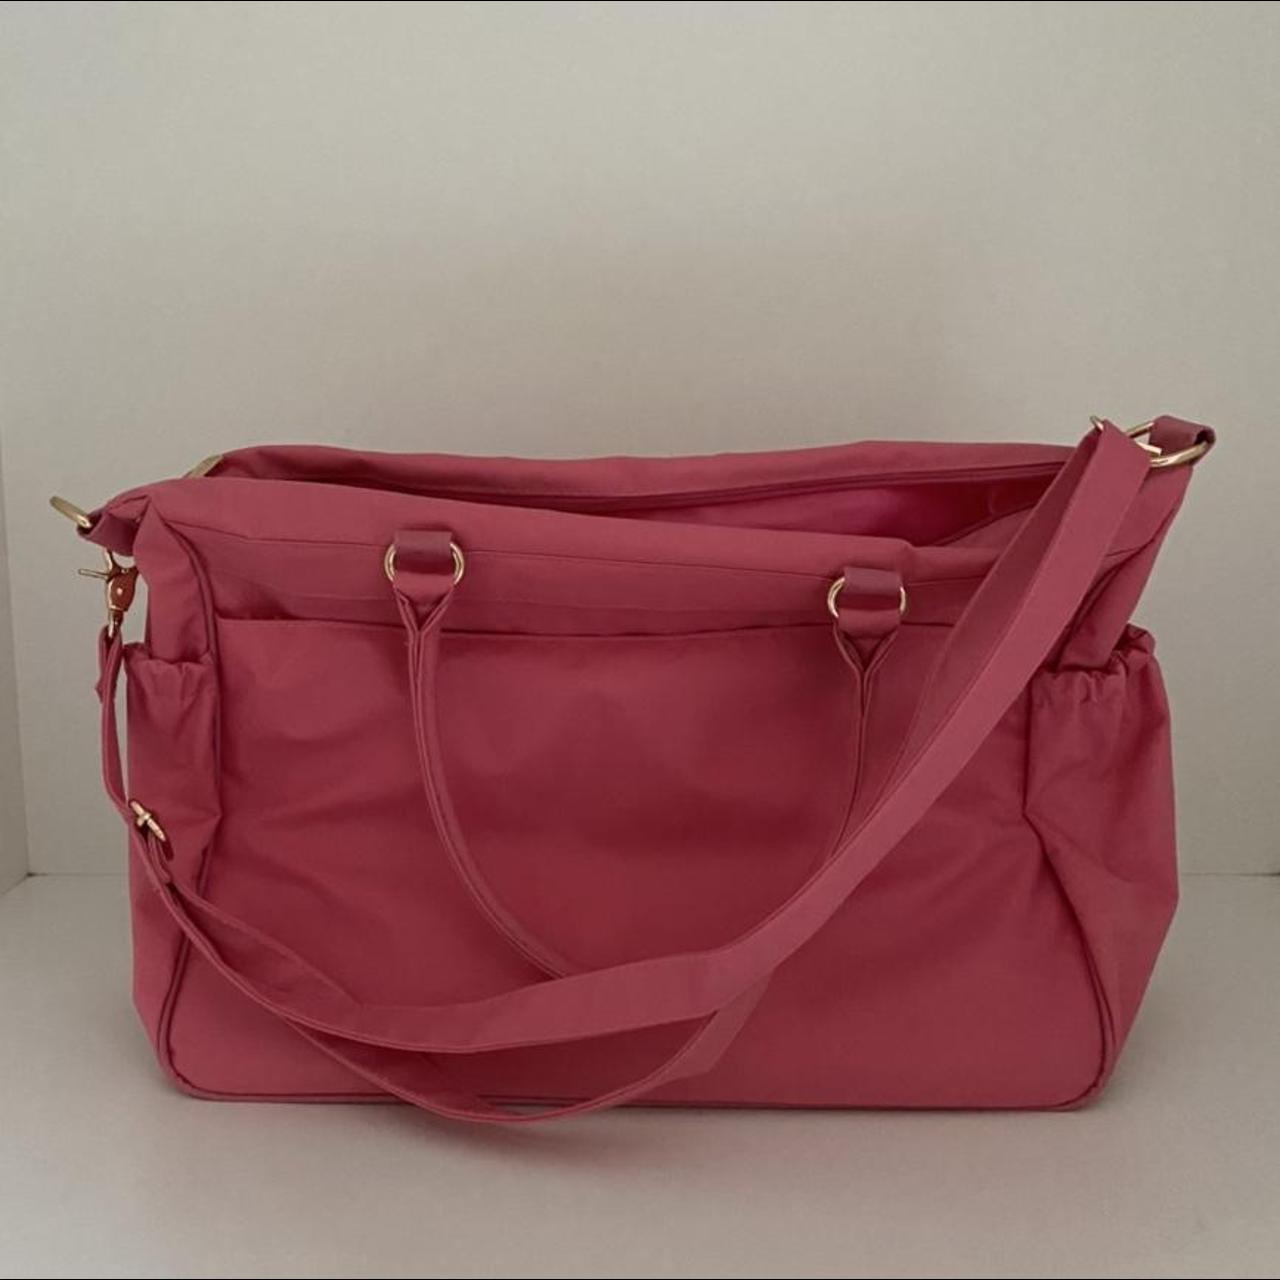 Colette 2010 pink bag 💗 In perfect condition, hasn’t... - Depop